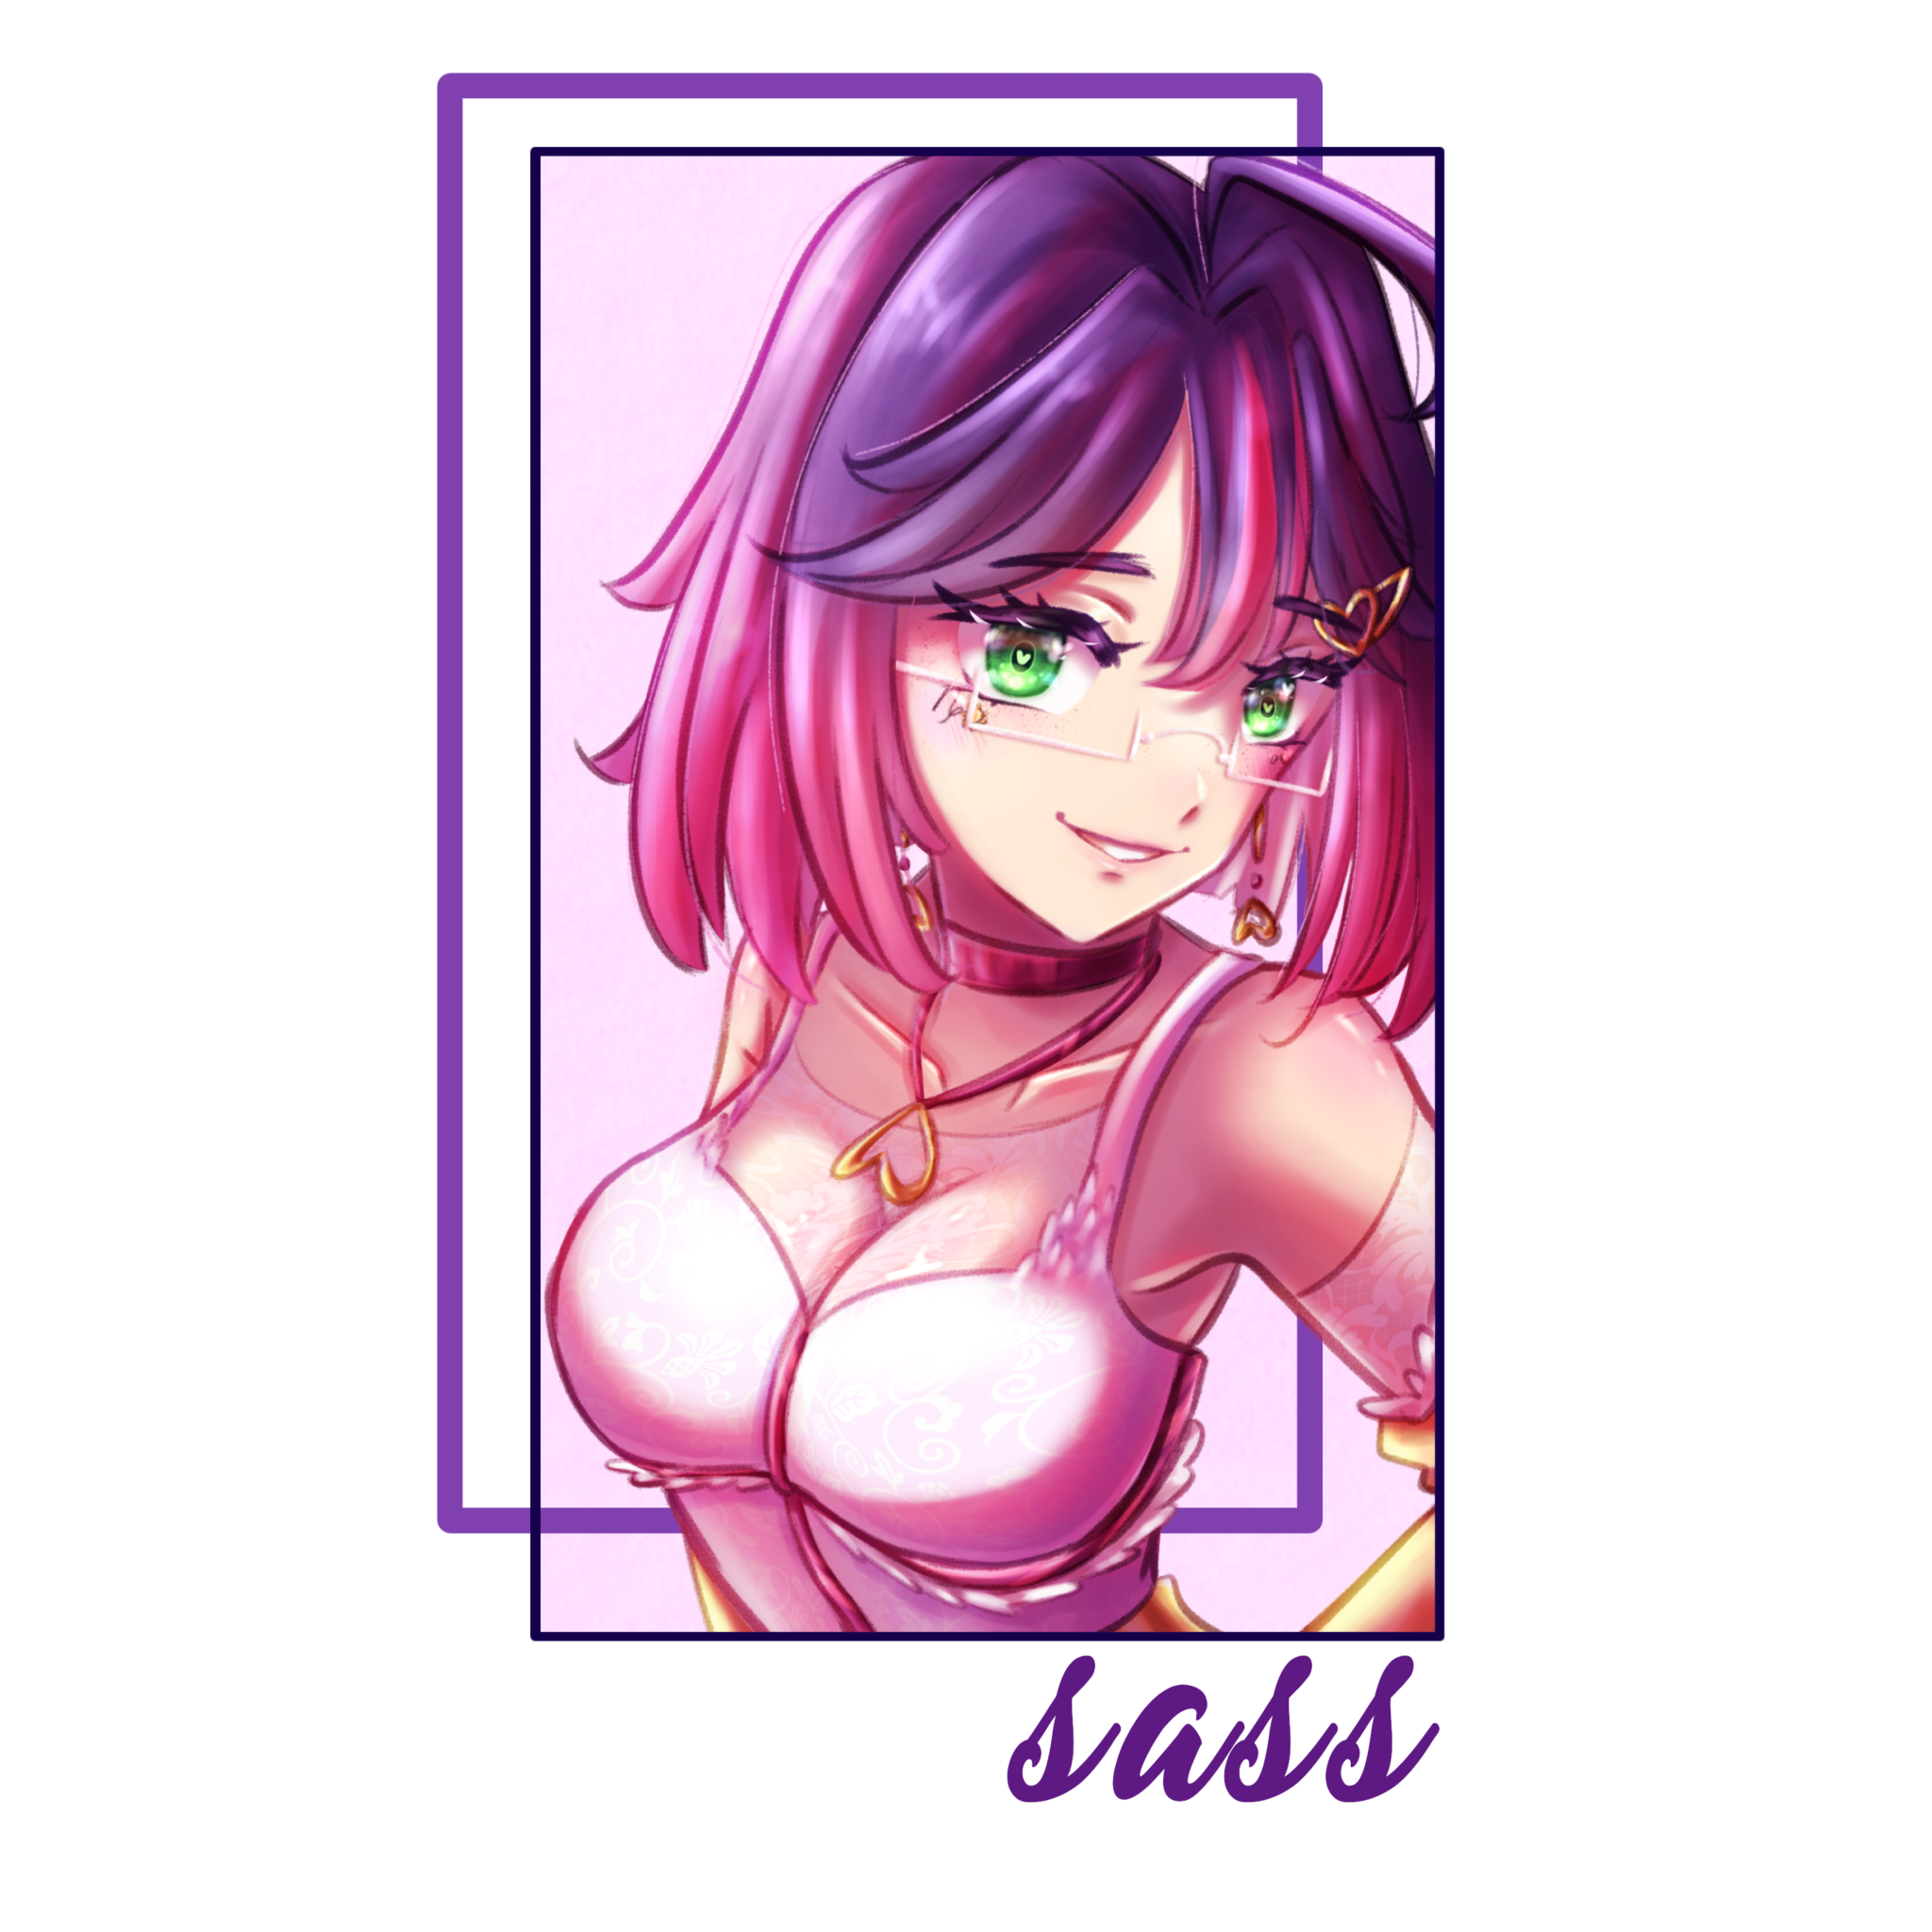 An Asophia artwork featuring an anime girl with pink hair and purple eyes, available on Sass T-Shirts.